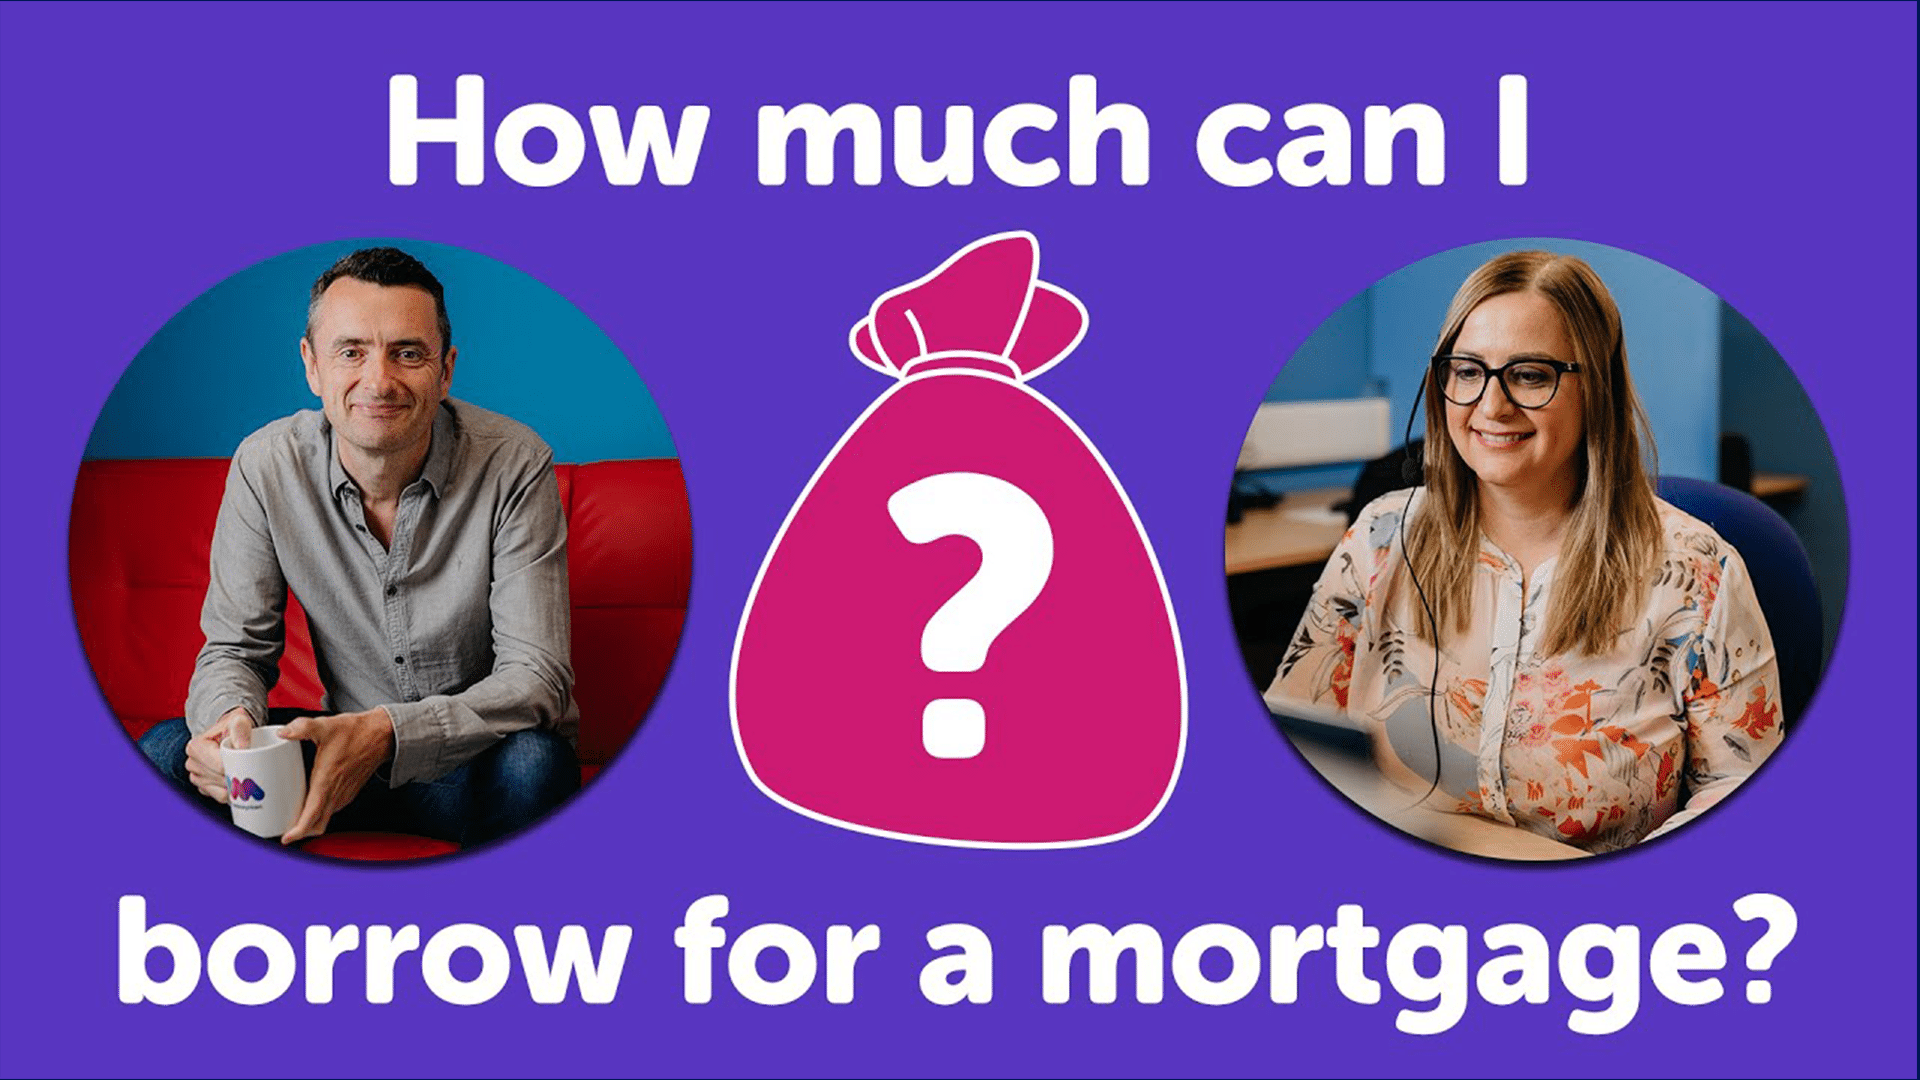 How Much Can I Borrow For A Mortgage in Coventry?